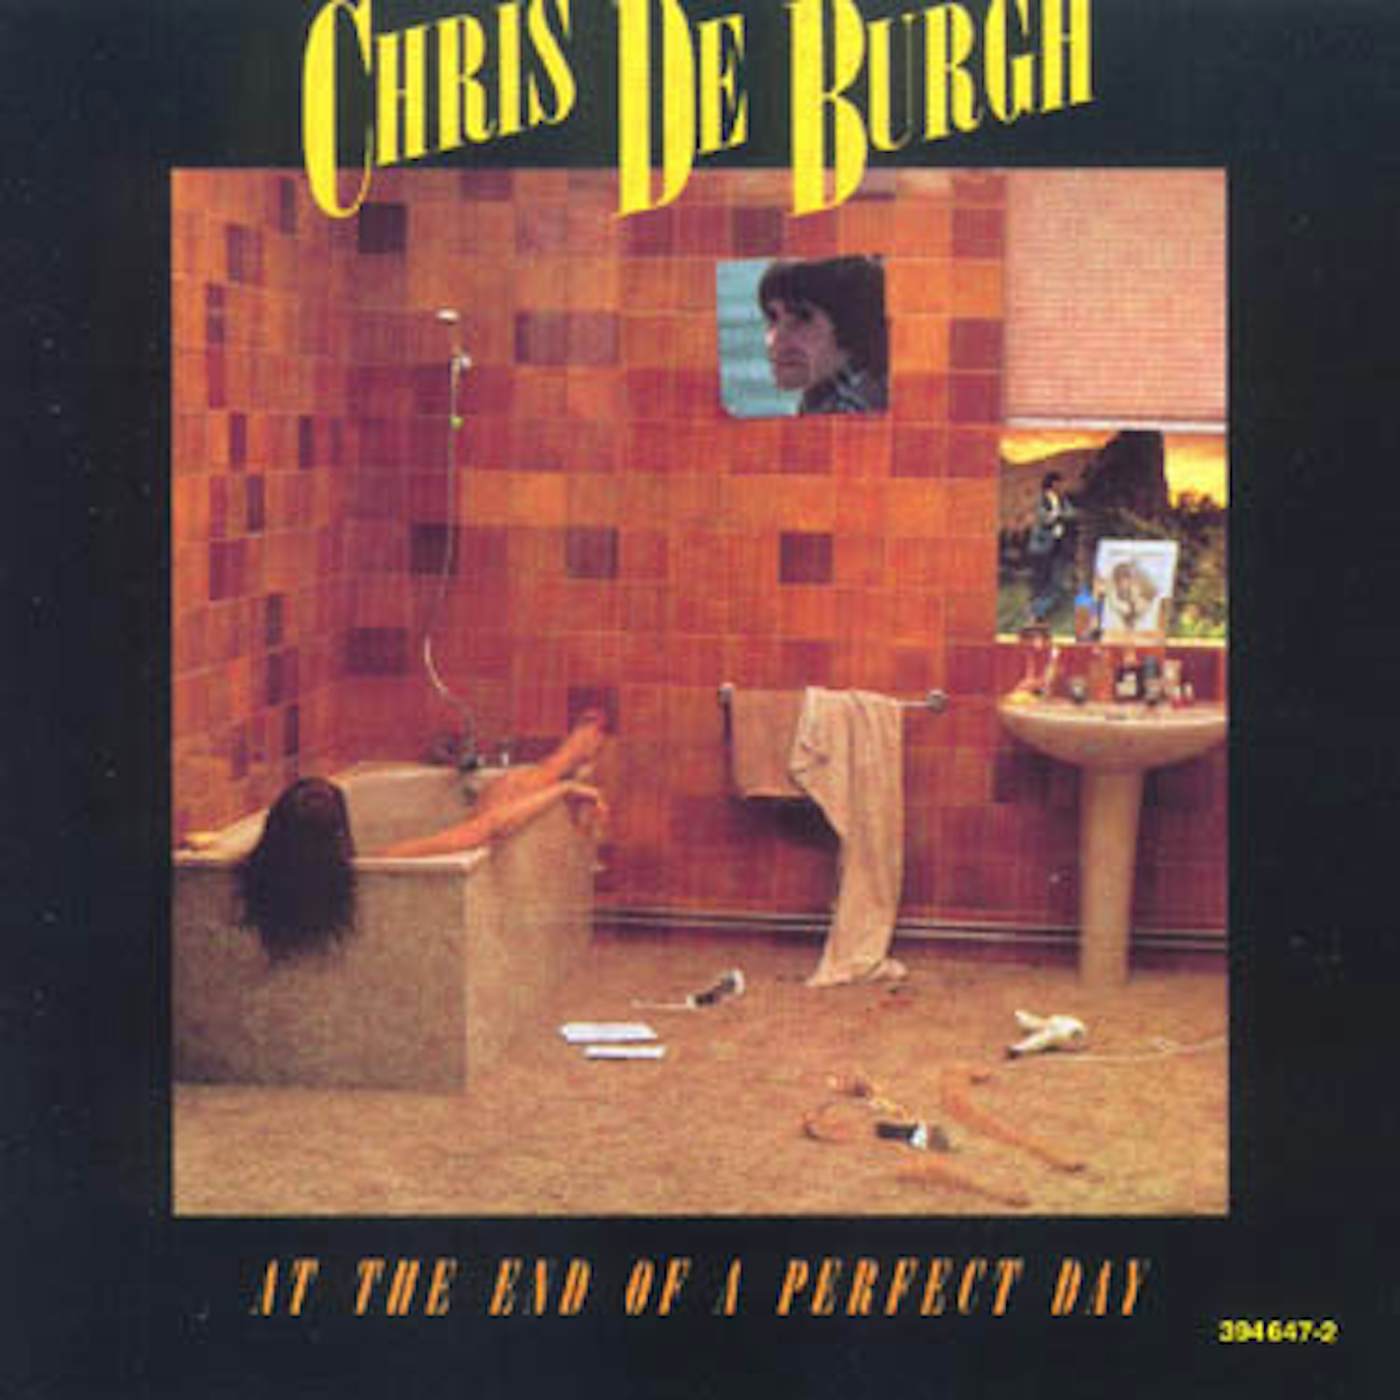 Chris de Burgh AT THE END OF A PERFECT DAY CD